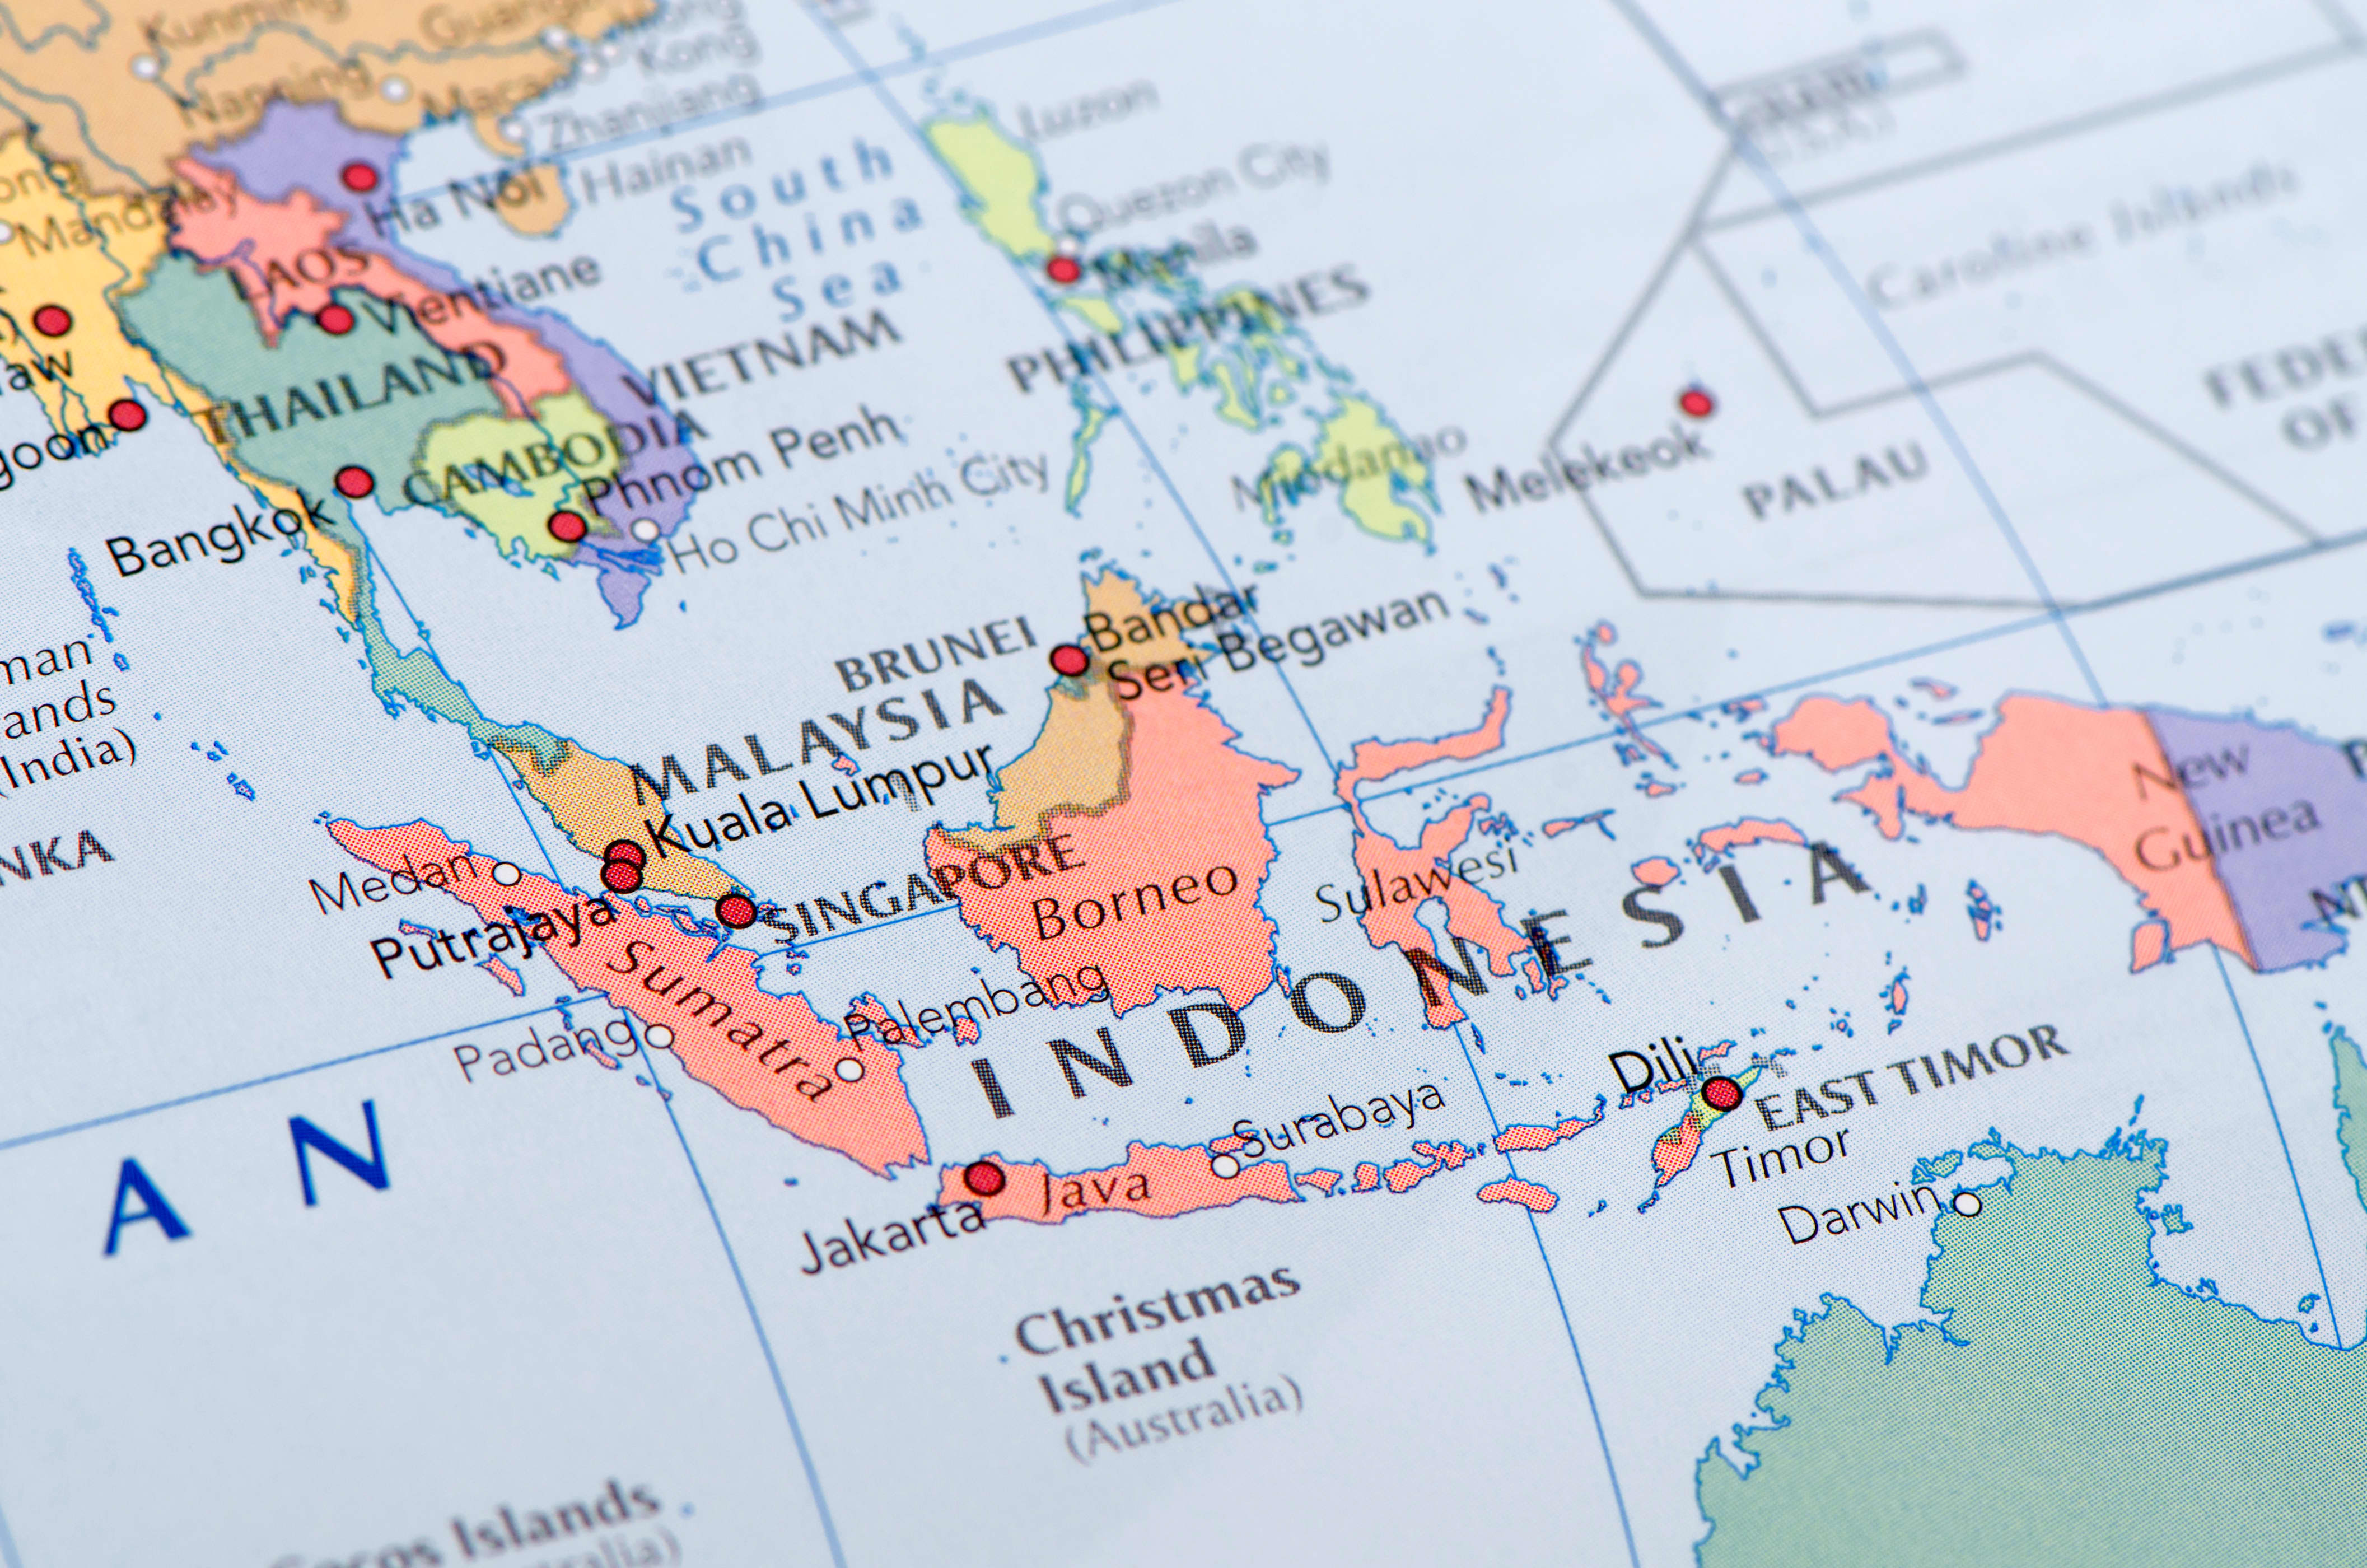 US, Japan and Indonesia set their sights on the Indo-Pacific region